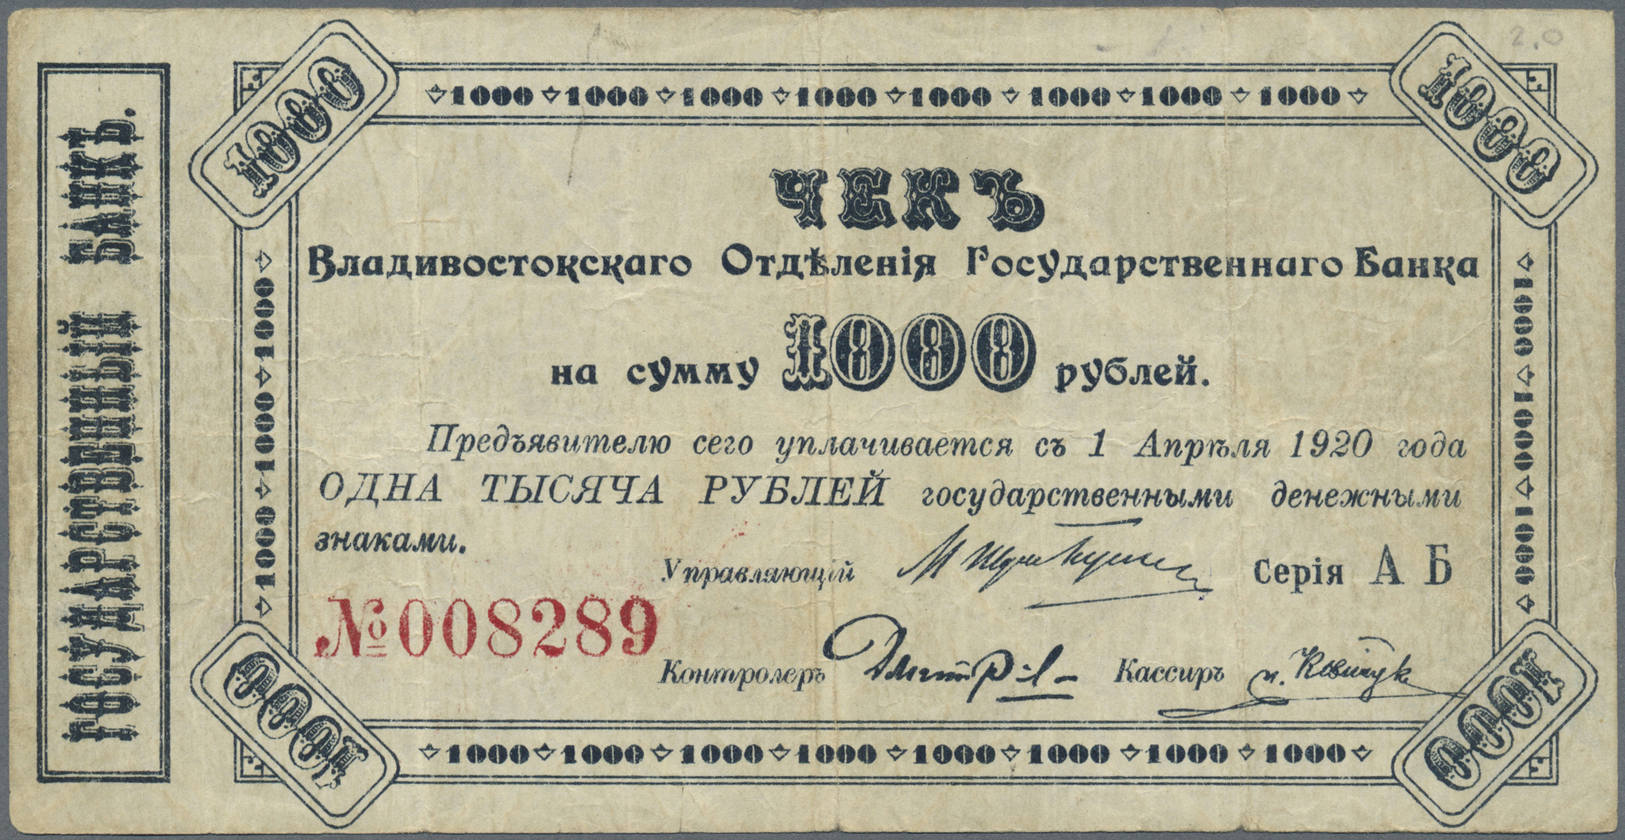 02472 Russia / Russland: Vladivostok State Bank Branch 1000 Rubles Check Issue 1920, P.S1254 In Fine Condition With Stai - Russia